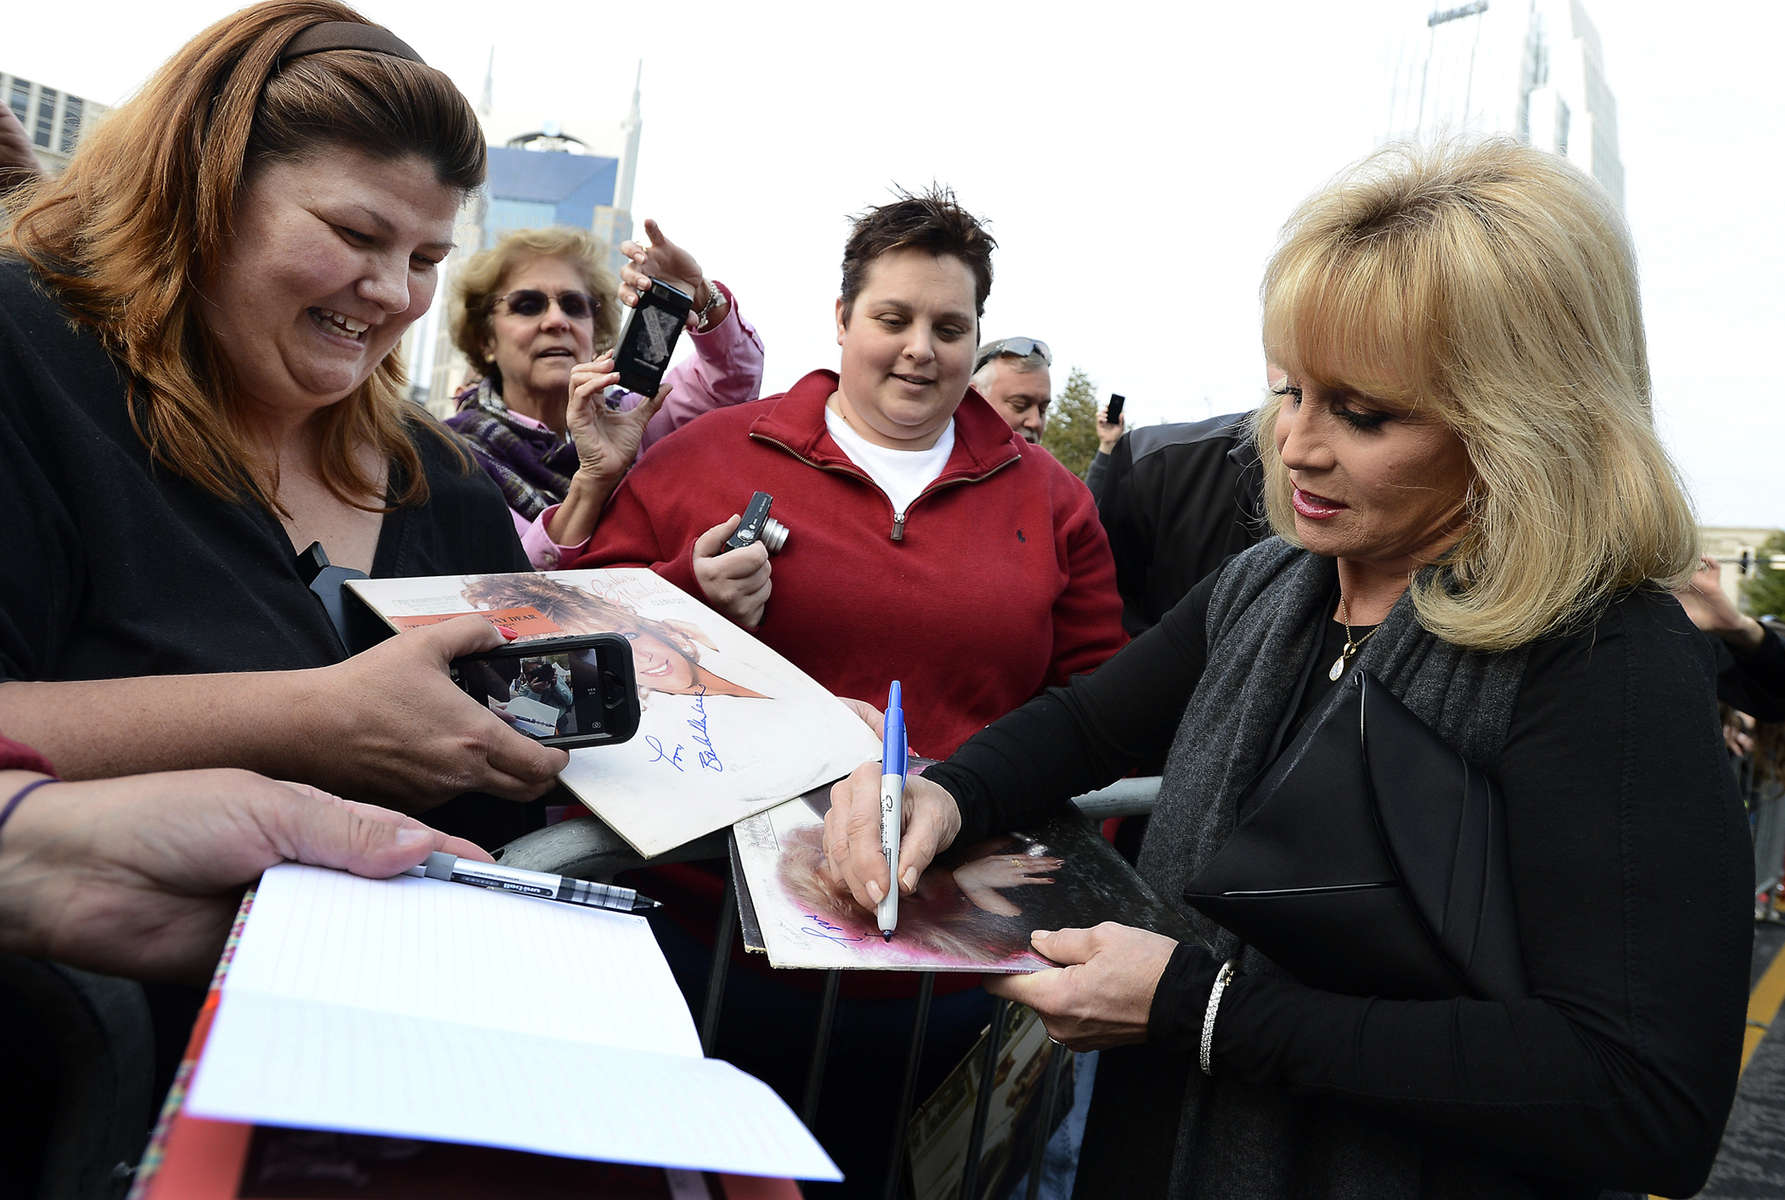 Barbara Mandrell signs autographs for fans after arriving at the ceremony for the 2013 inductions into the Country Music Hall of Fame in Nashville, Tenn. The inductees are Bobby Bare, the late “Cowboy” Jack Clement and Kenny Rogers. (AP Photo/ Mark Zaleski)